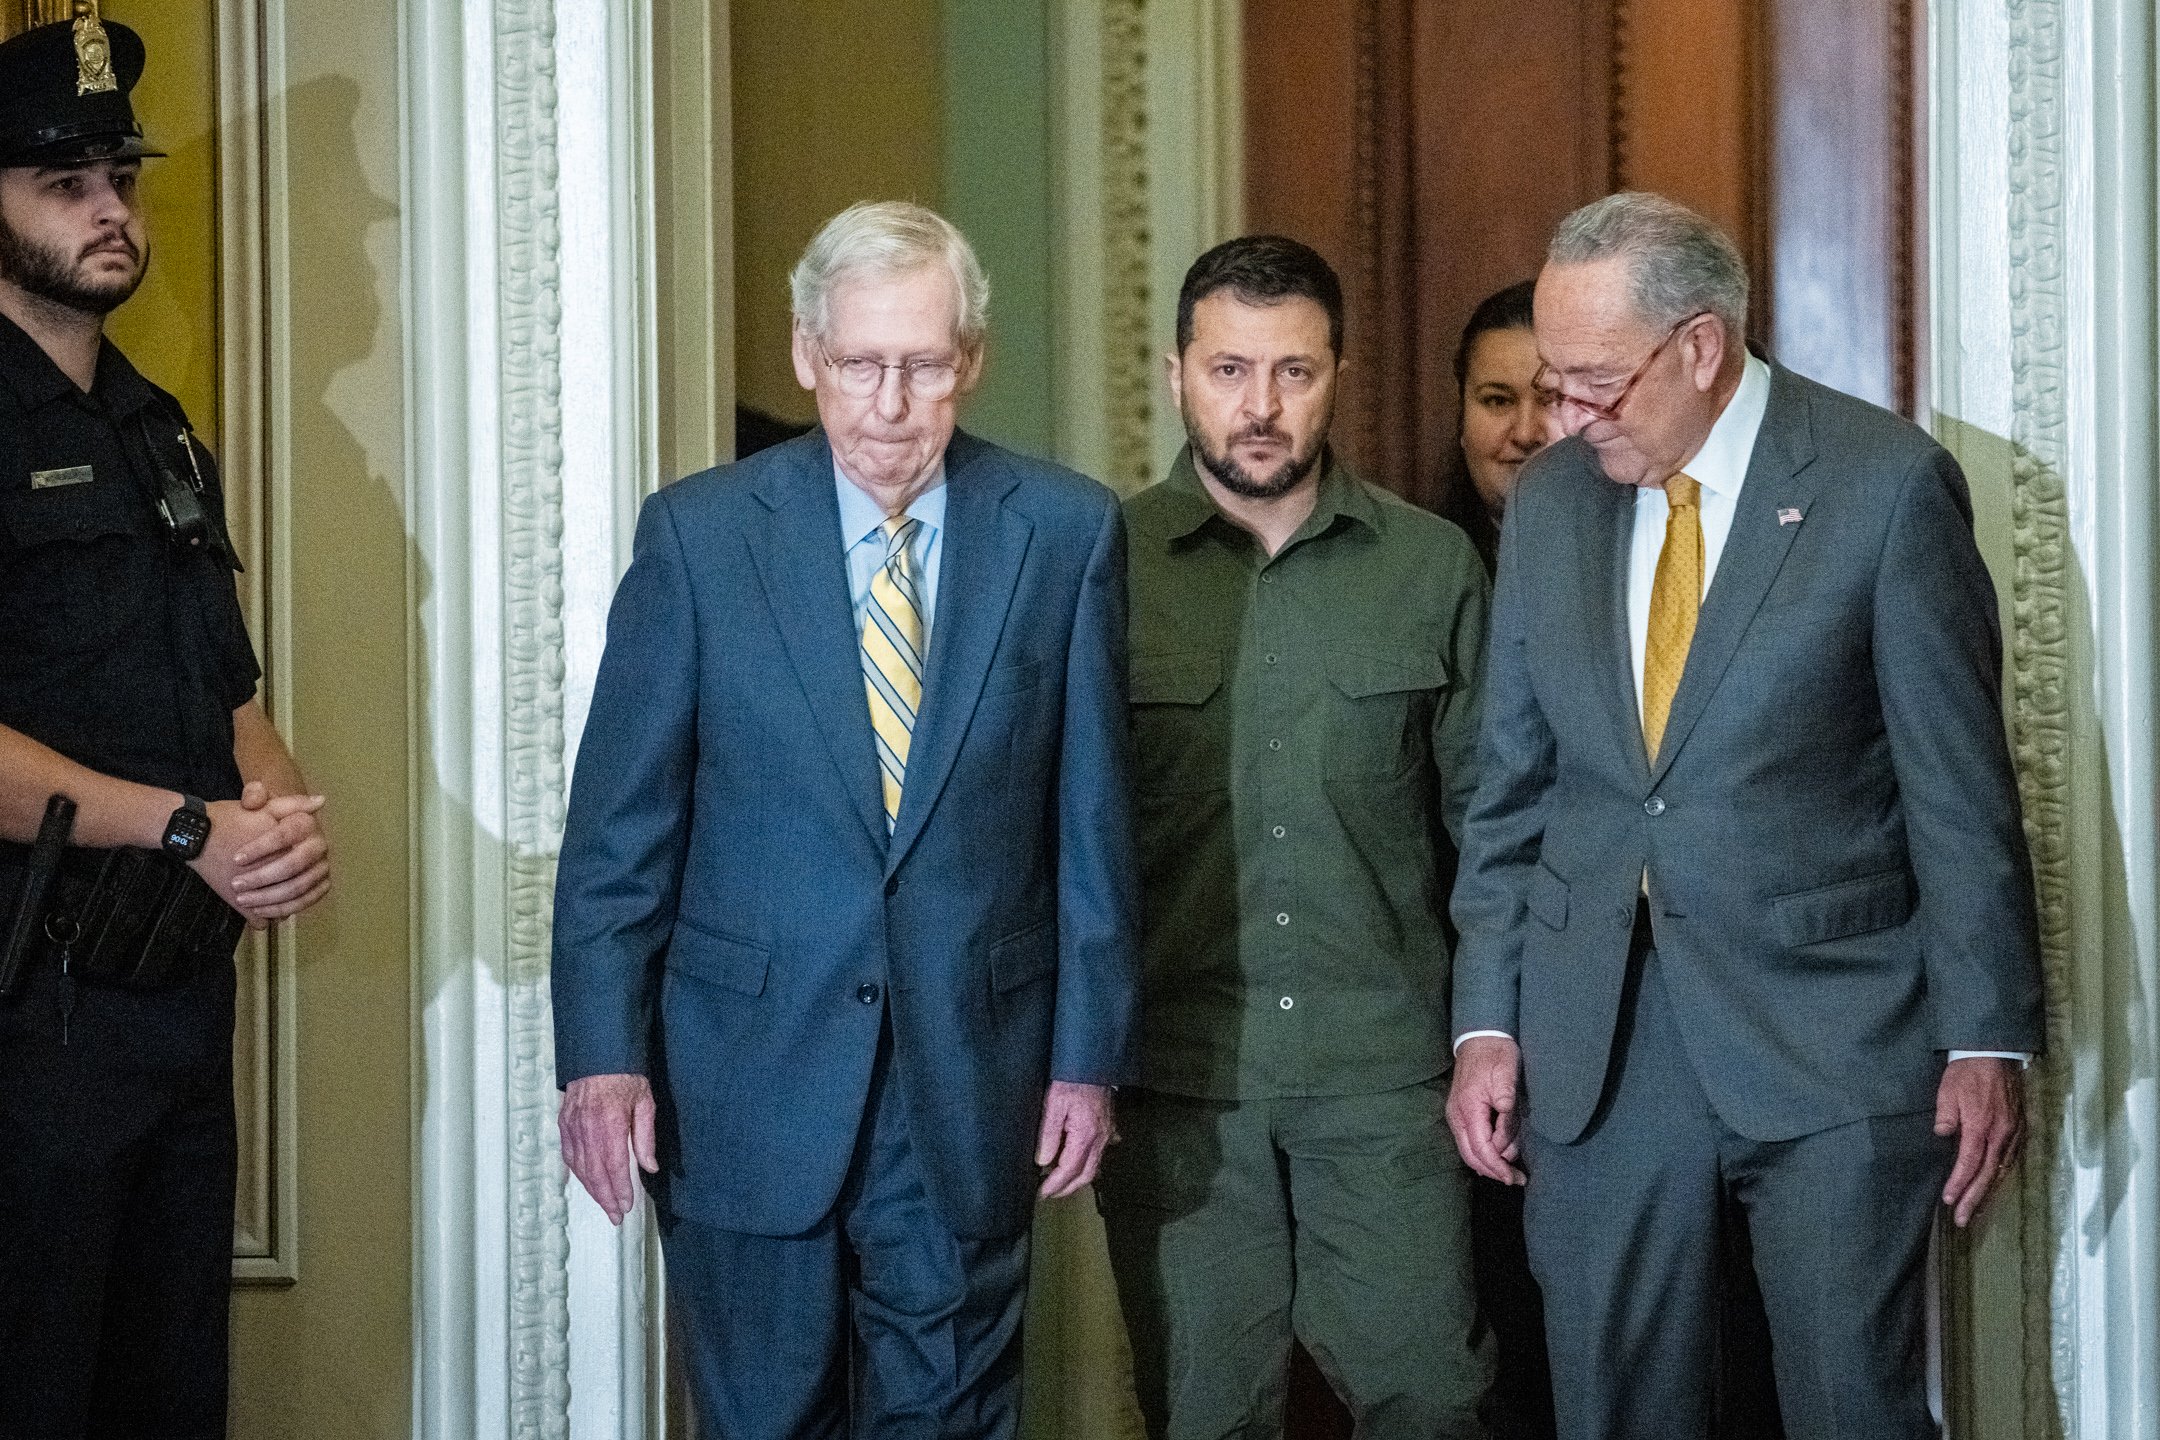  Senator Mitch McConnell (R-KY), the Senate Minority Leader; Ukrainian President Volodymyr Zelenskyy; and Senator Chuck Schumer (D-N.Y.), the Senate Majority Leader, arrive for a meeting with Senators to discus American aid to Ukraine, at the U.S. Ca